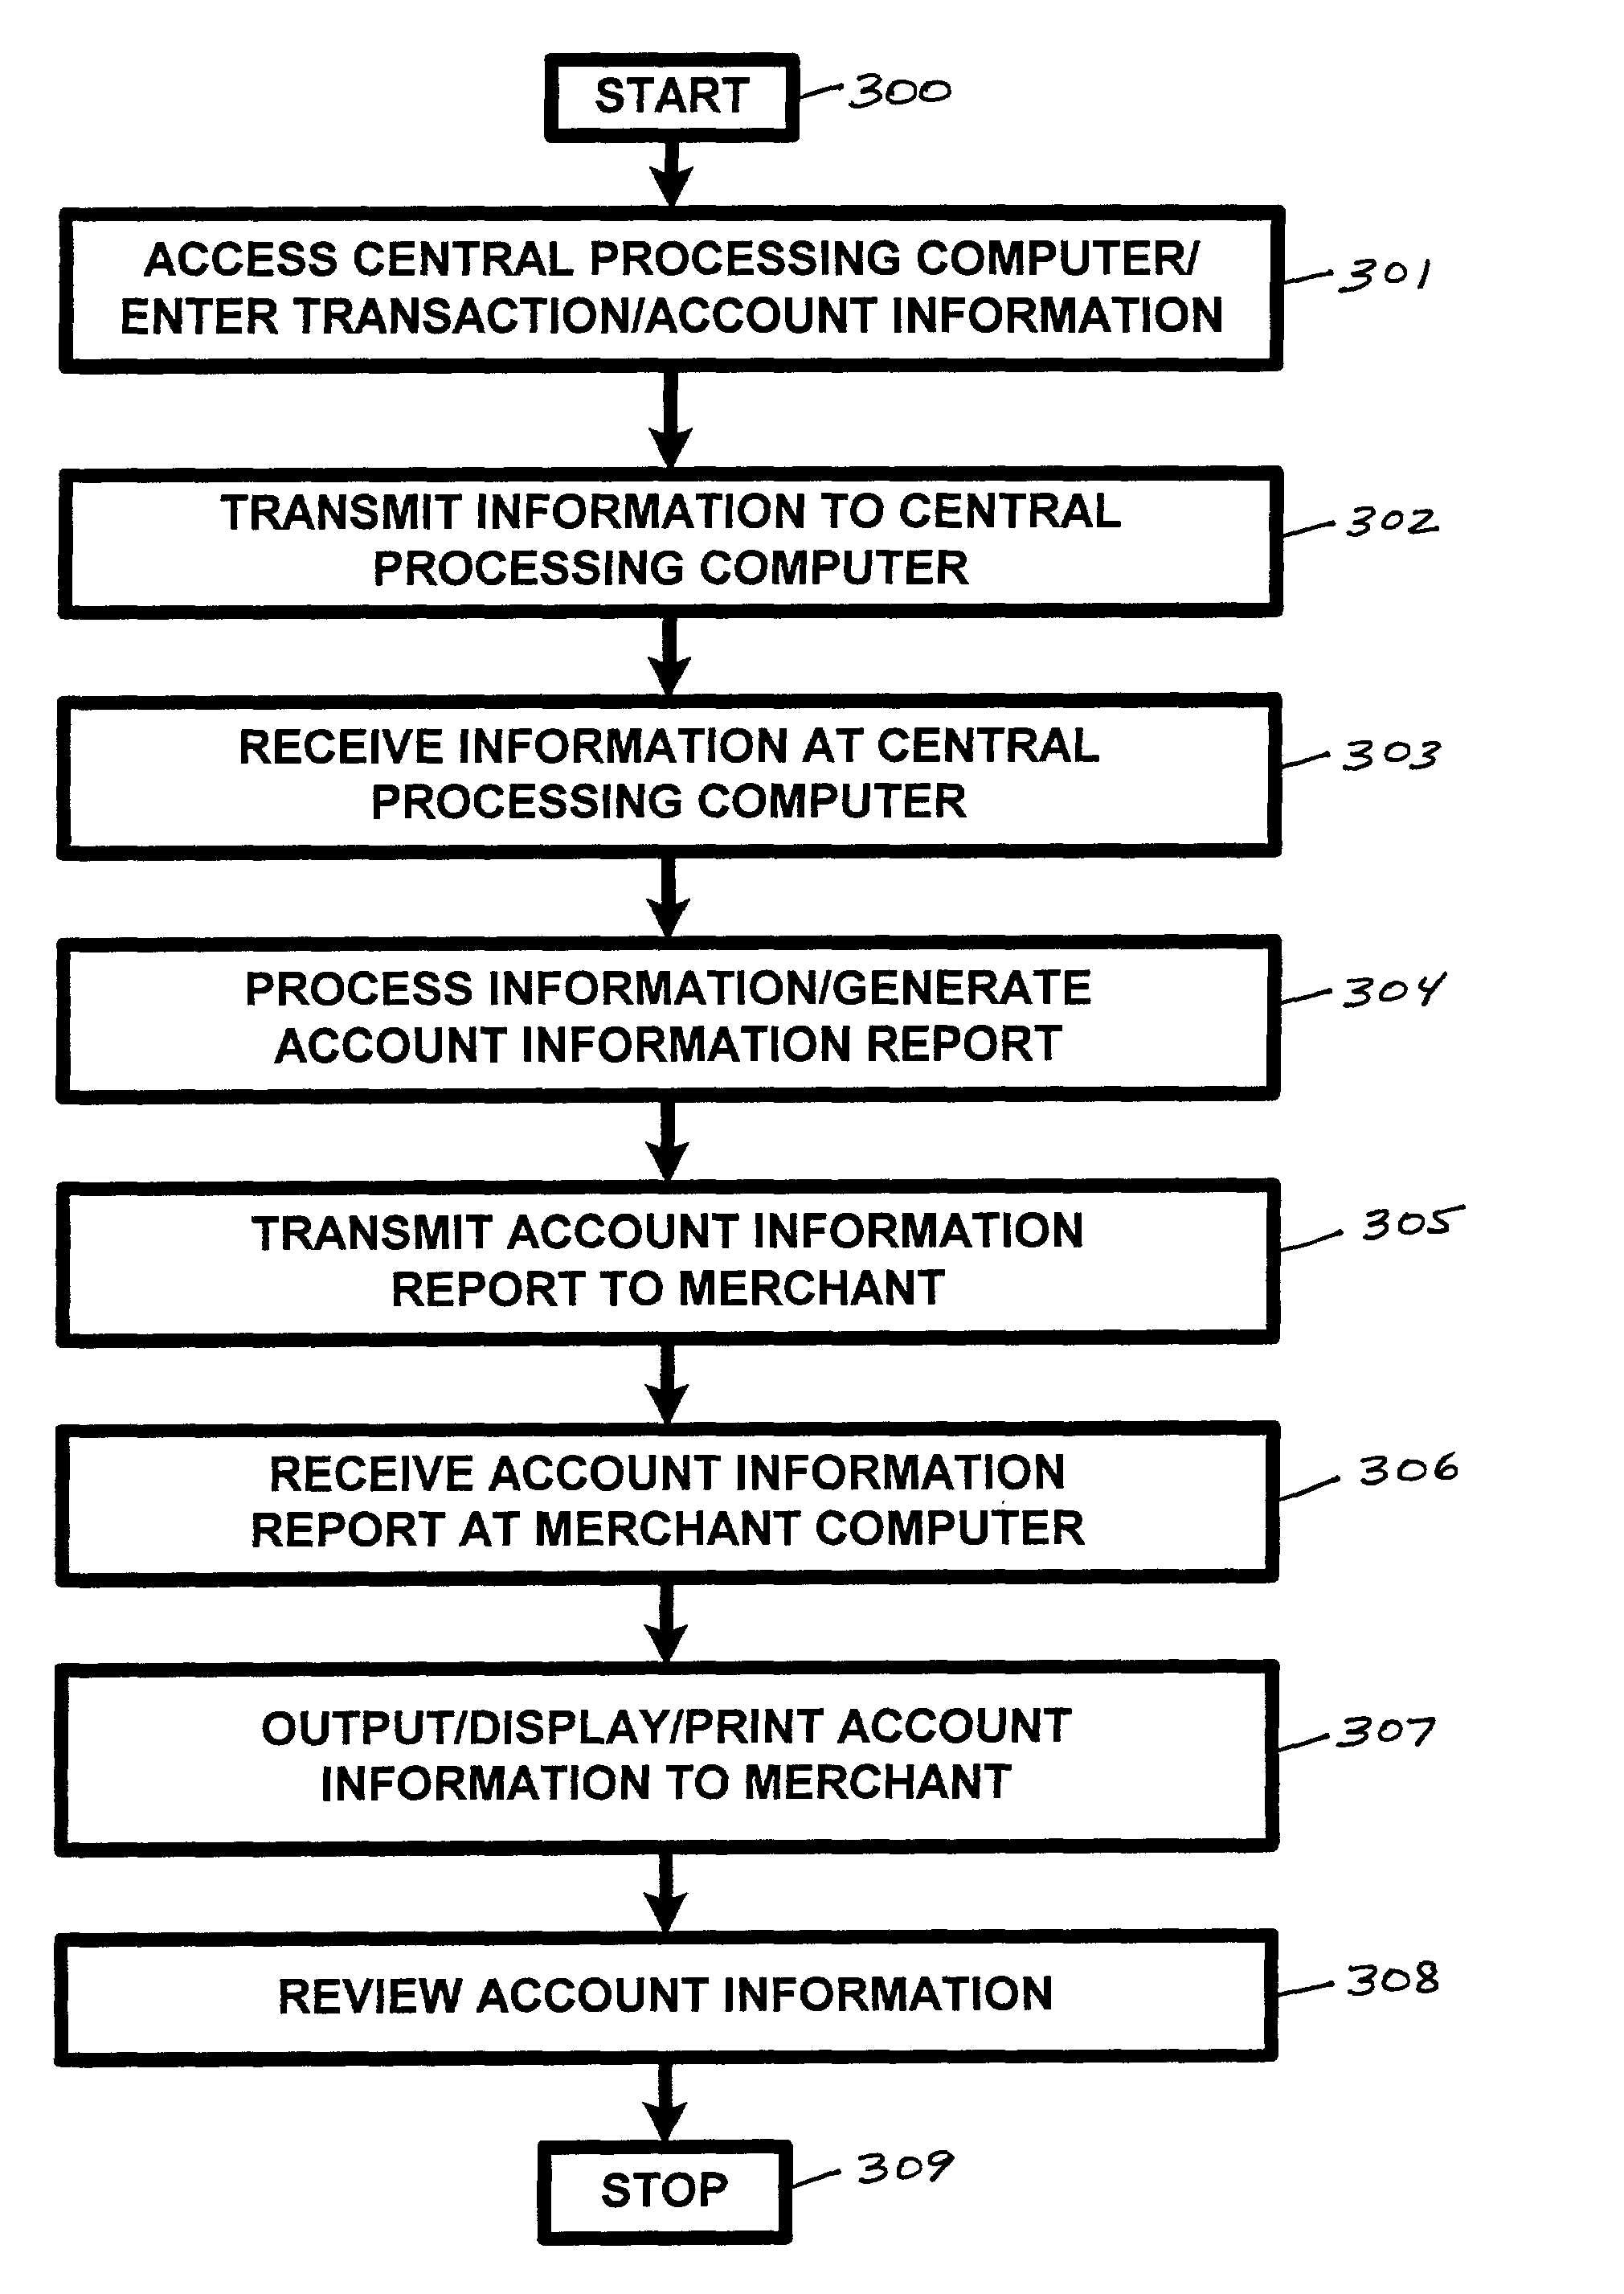 Apparatus and method for providing transaction history information, account history information, and/or charge-back information